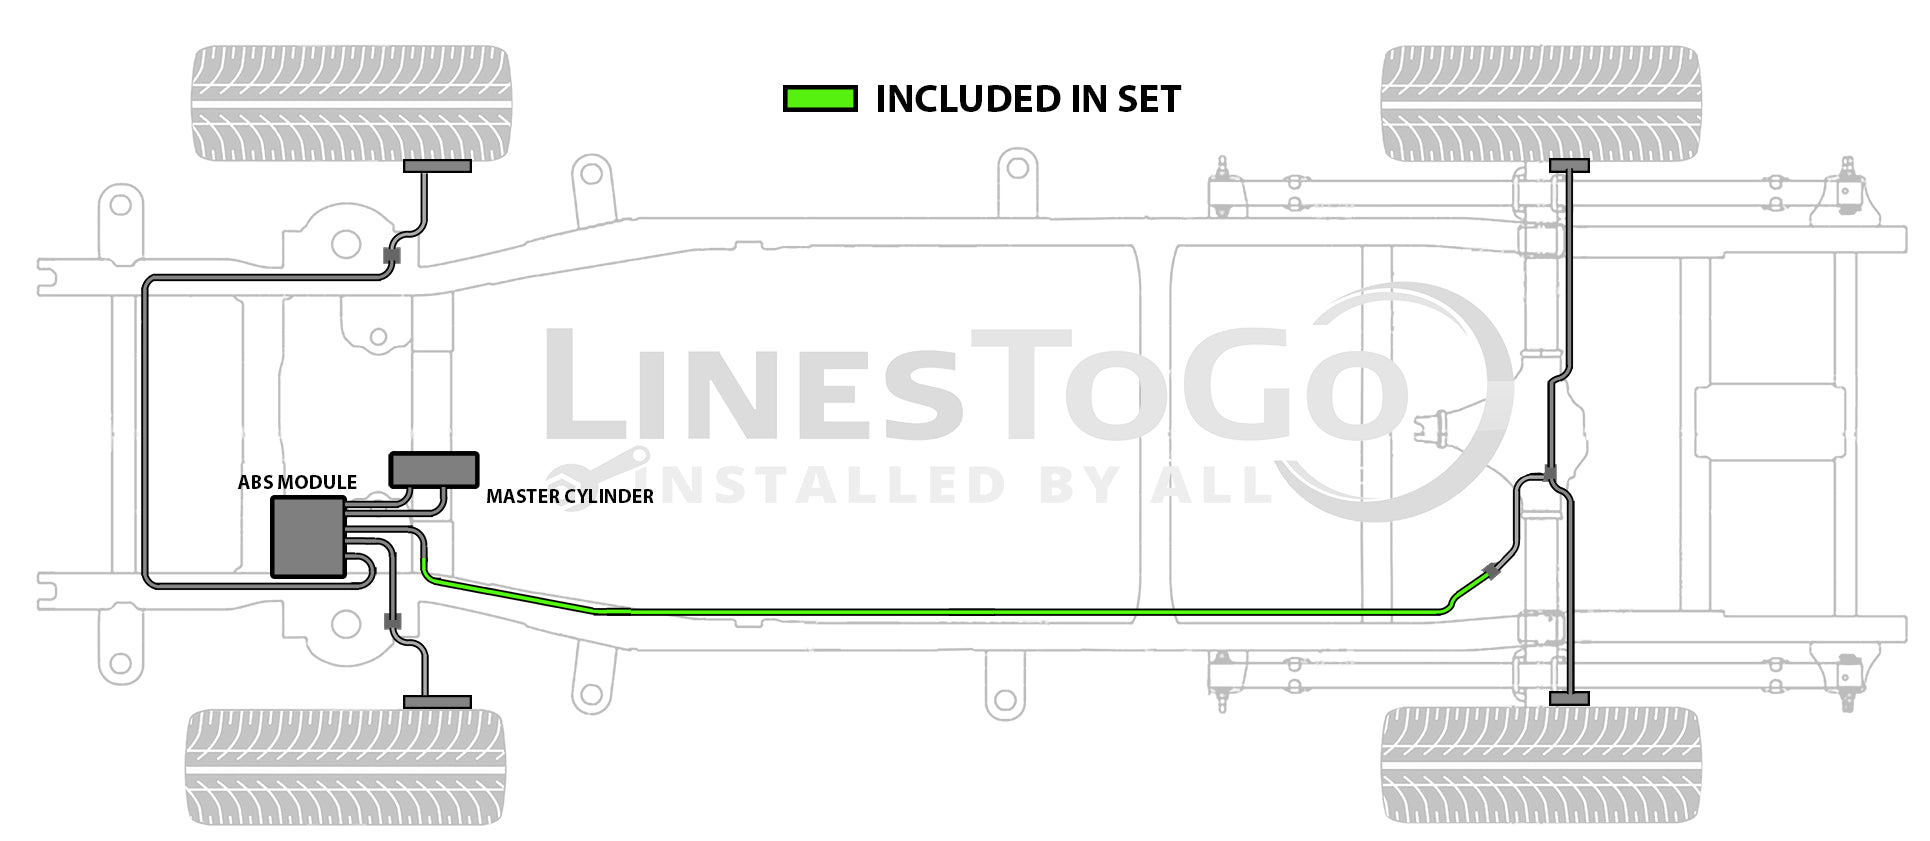 Chevy Truck Rear Fuel Line Set with Intermediate Brake Line 1993 K3500 4WD Crew Cab 8 ft Bed 7.4L FL246-D1H